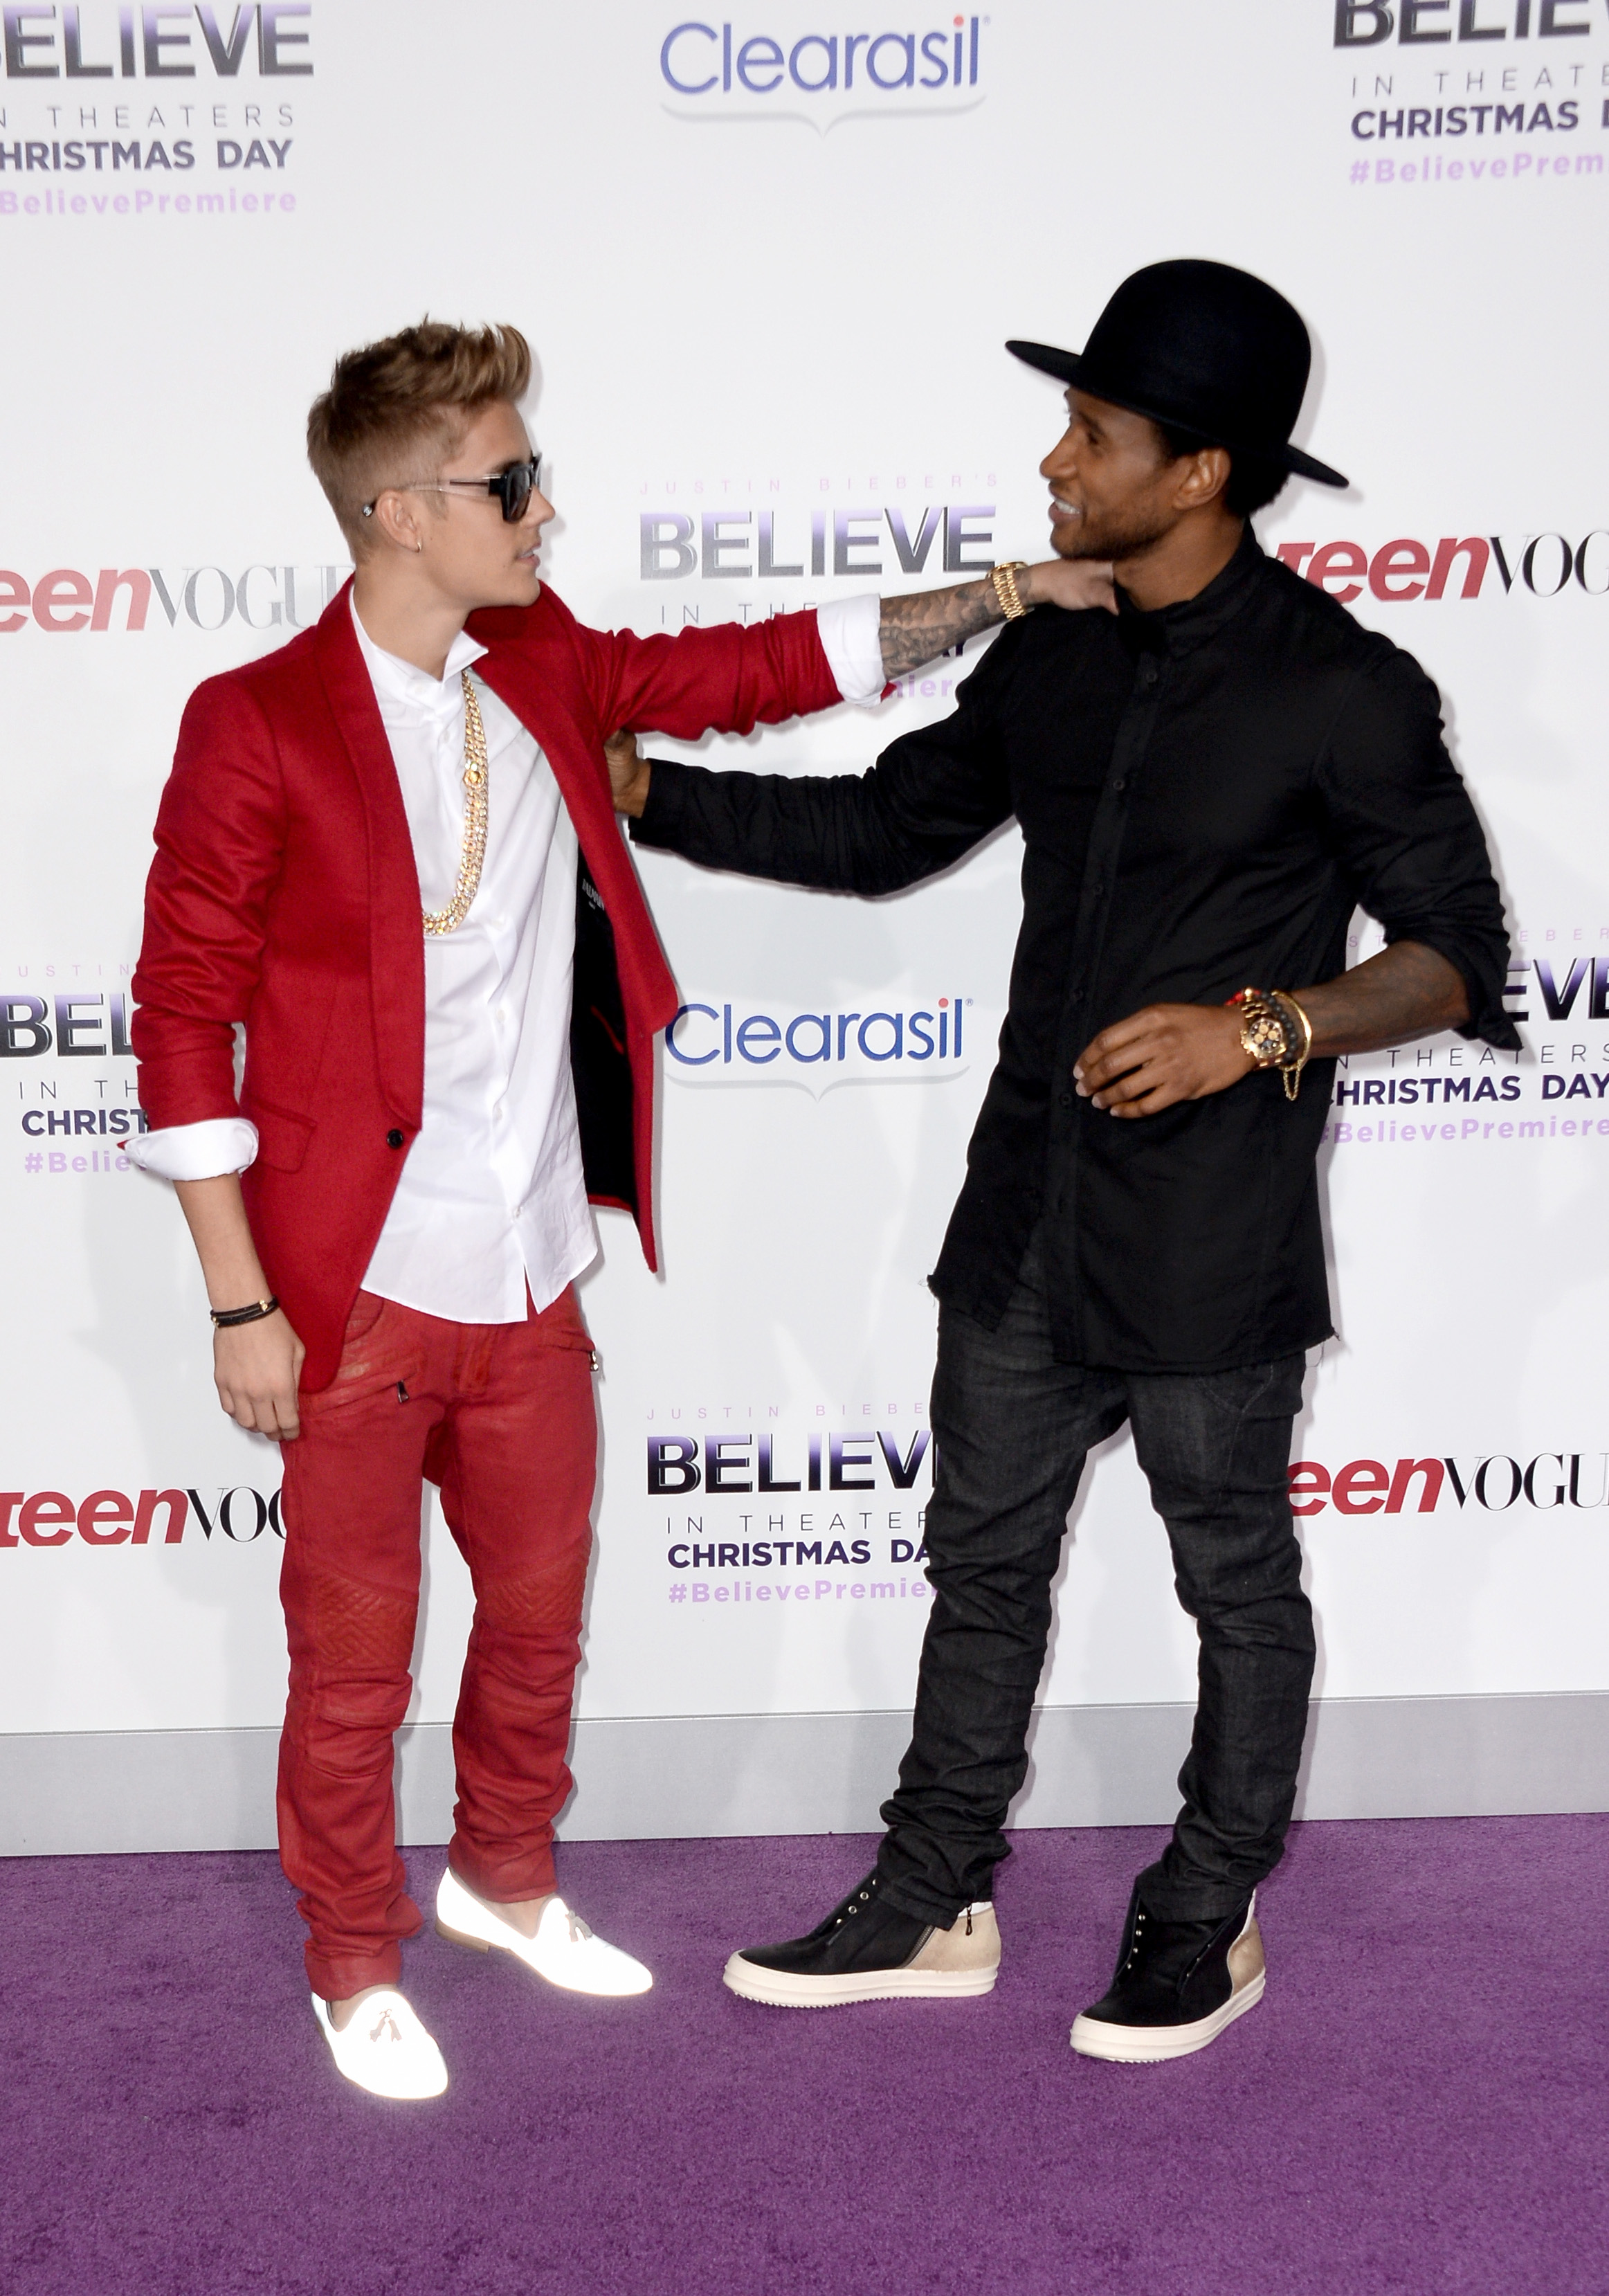 Usher continues to be Justin Bieber's friend and mentor to this day